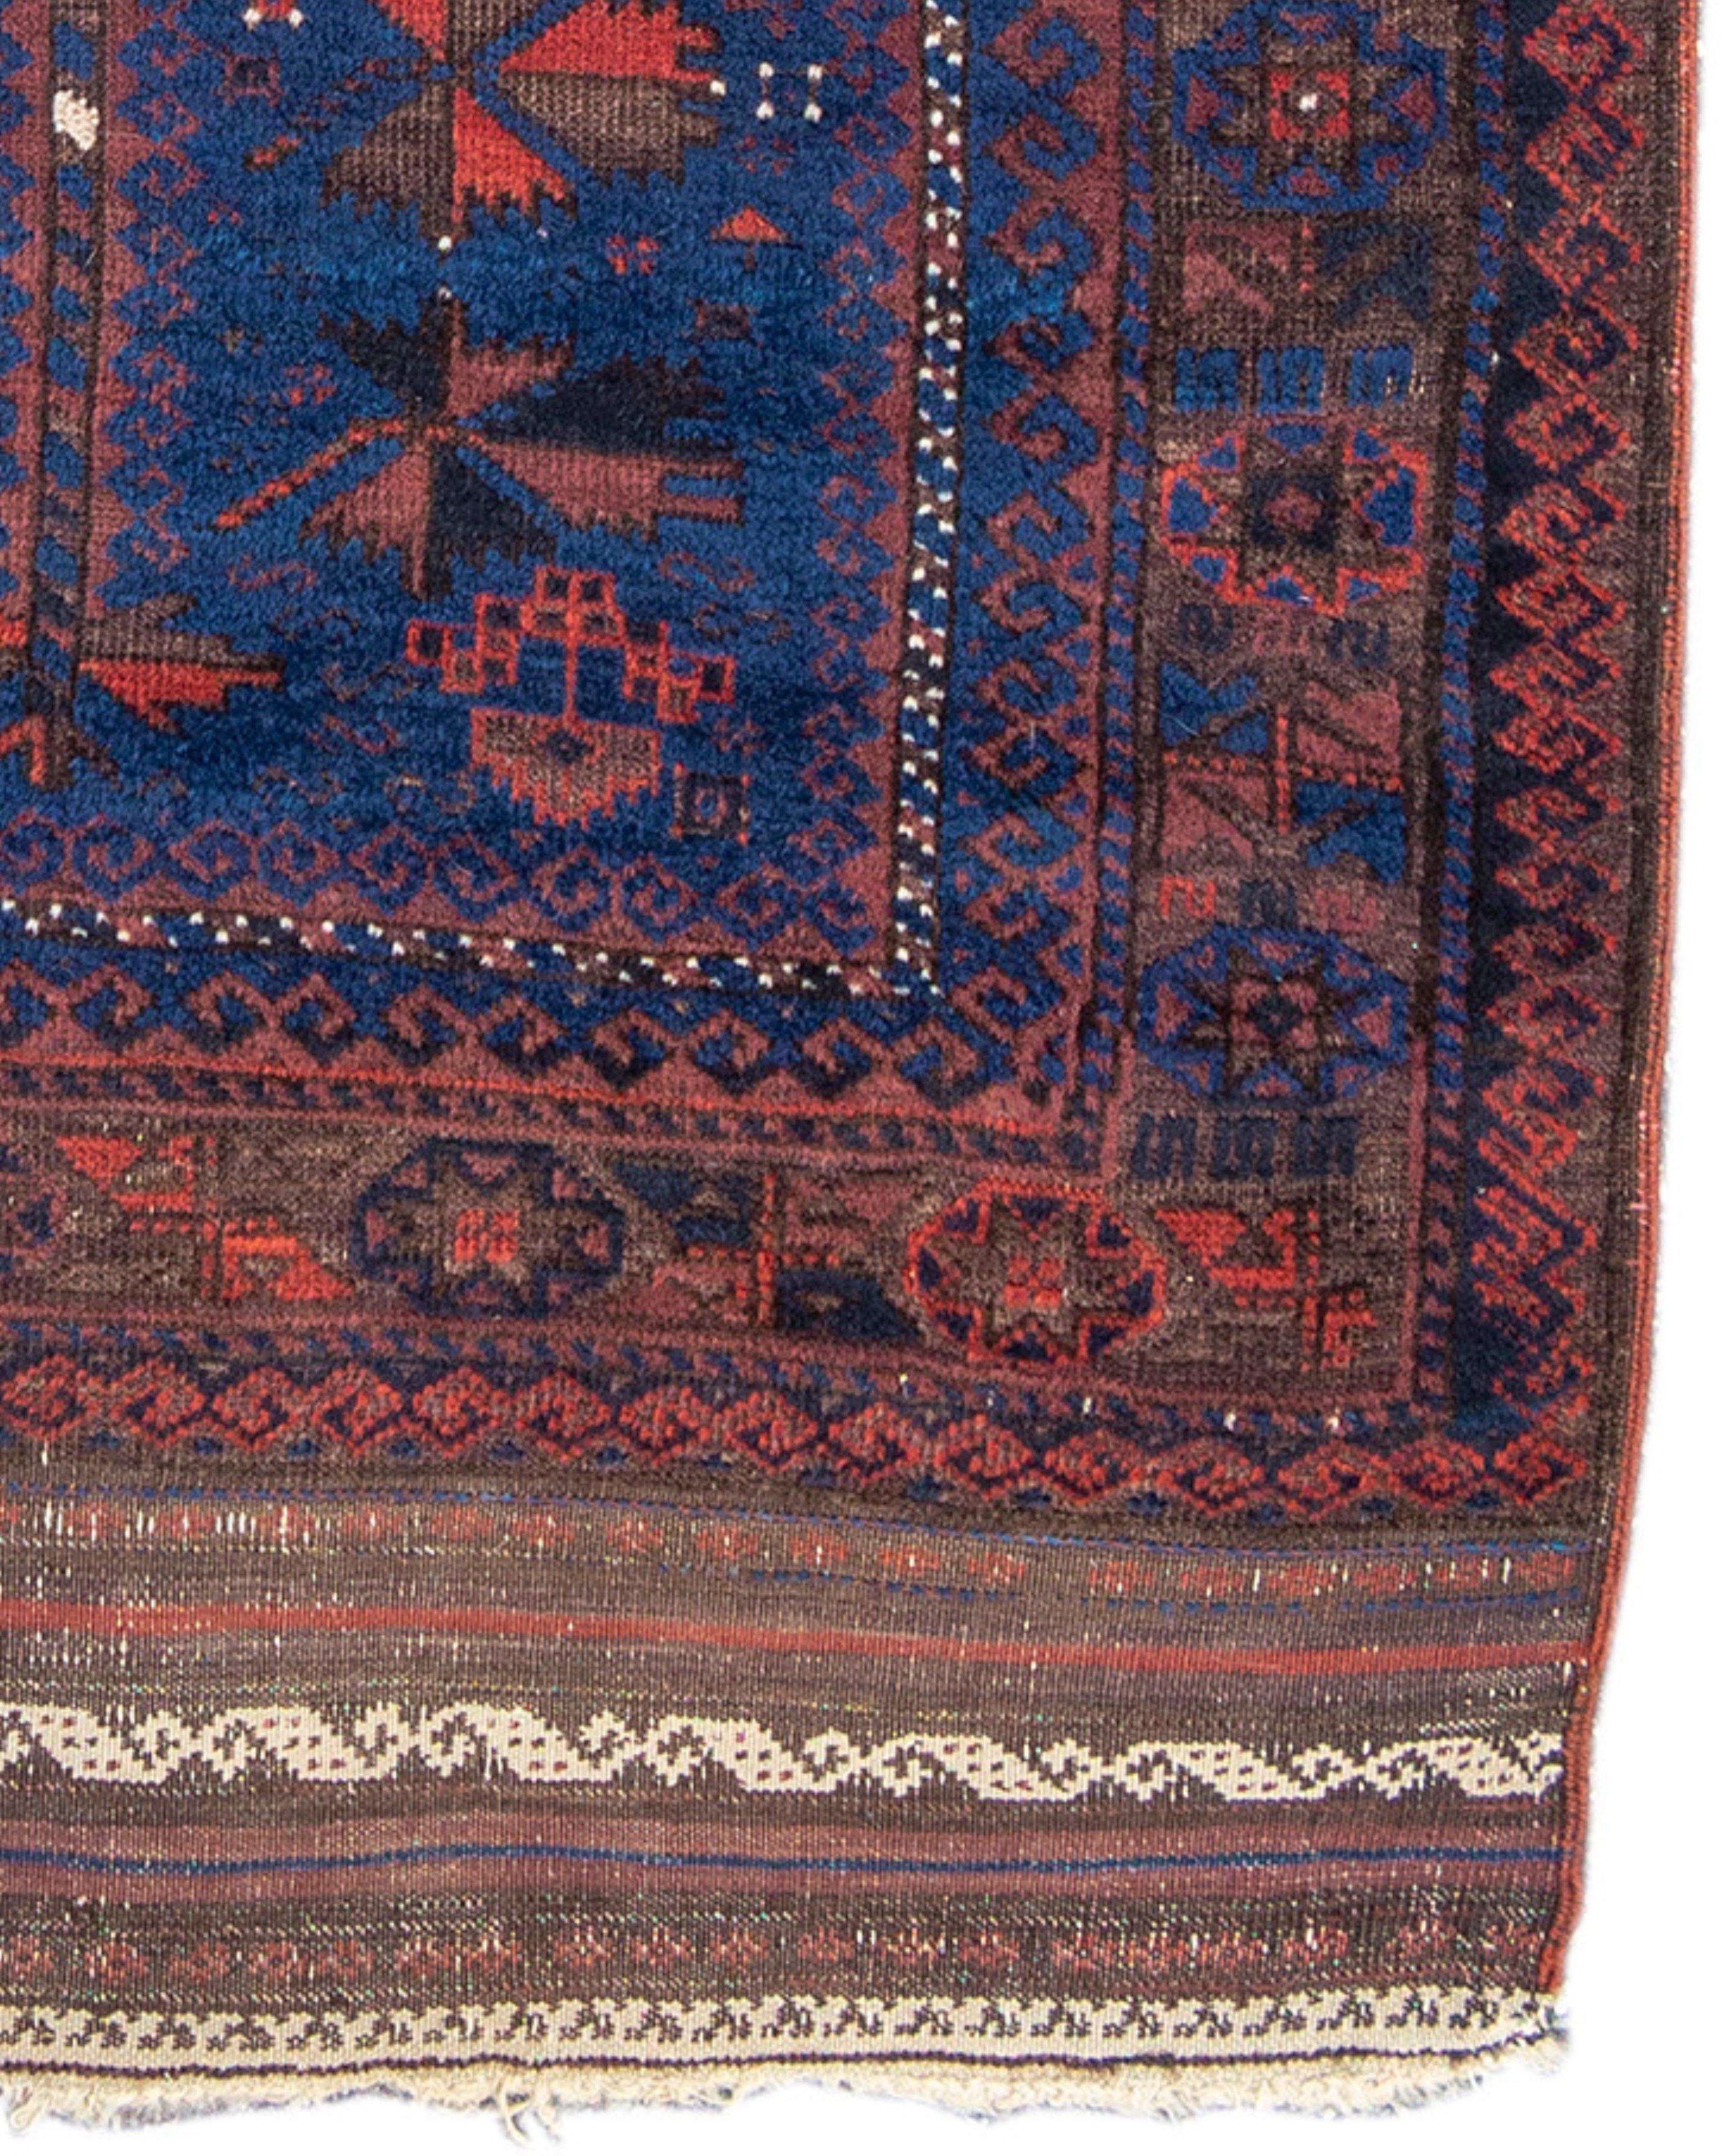 Wool Antique Afghan Baluch Prayer Rug, Late 19th Century For Sale